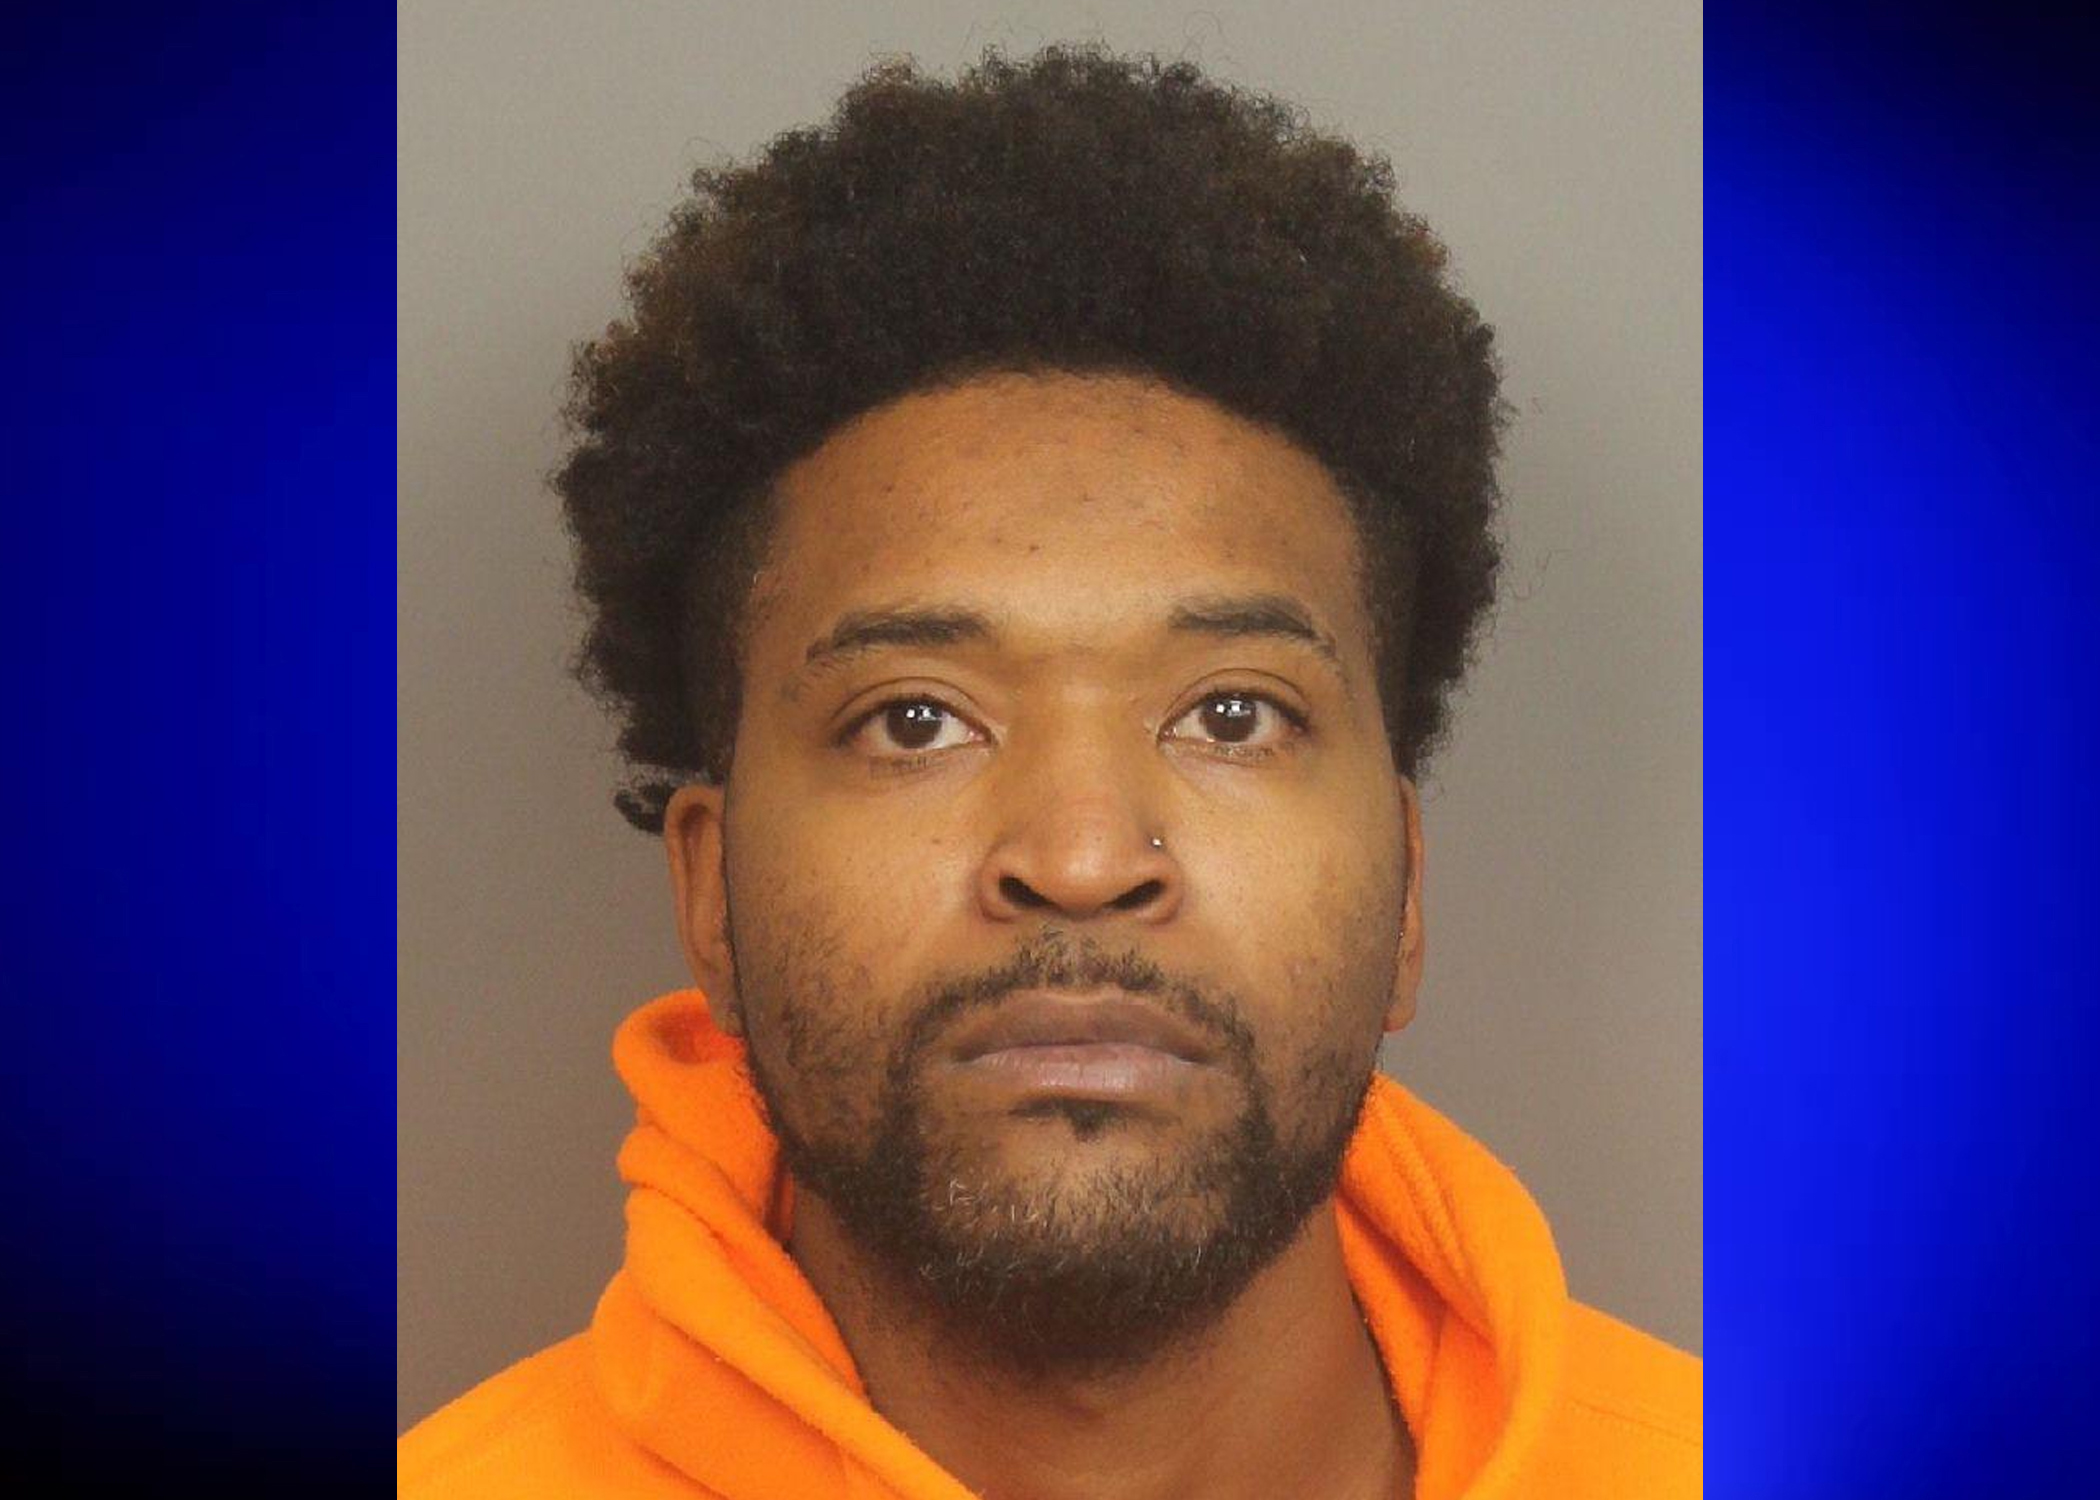 Center Point man facing charges after arrests from Trussville PD, Tarrant PD & Jefferson Co. Sheriff's Office